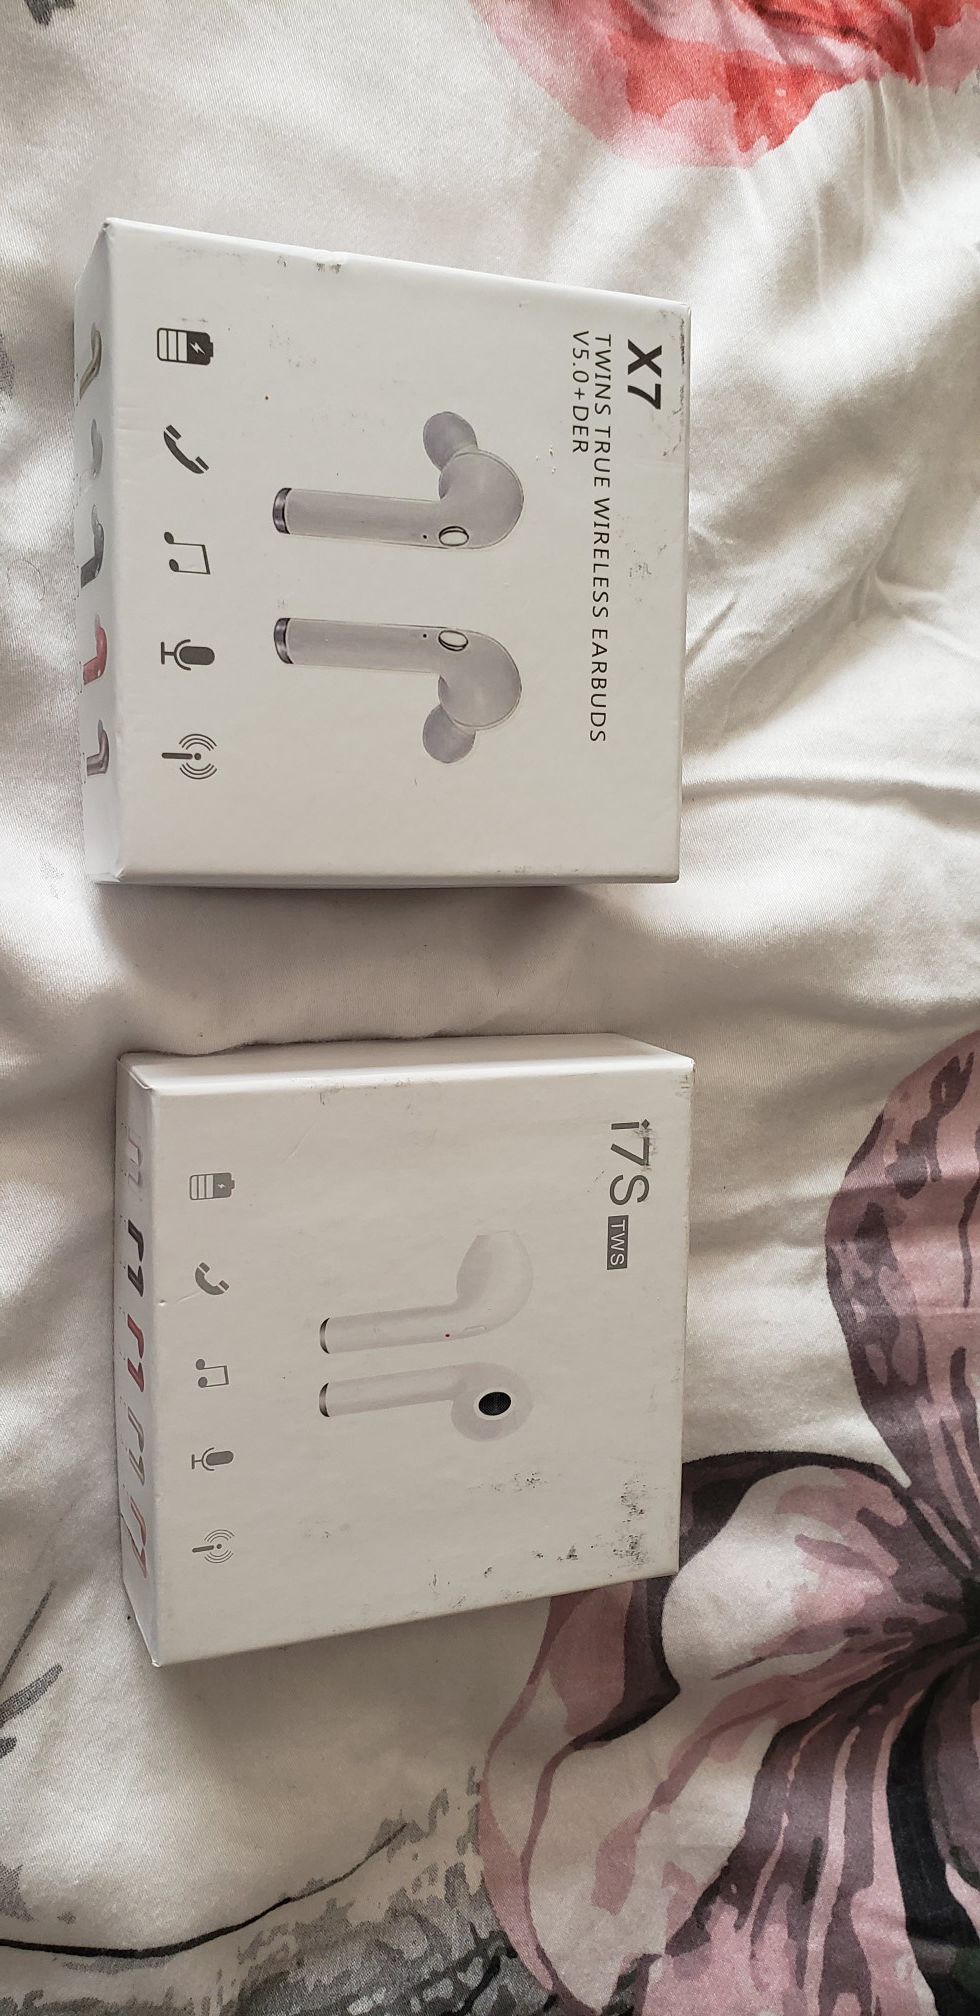 Wireless bluetooth earbuds NEW, never used